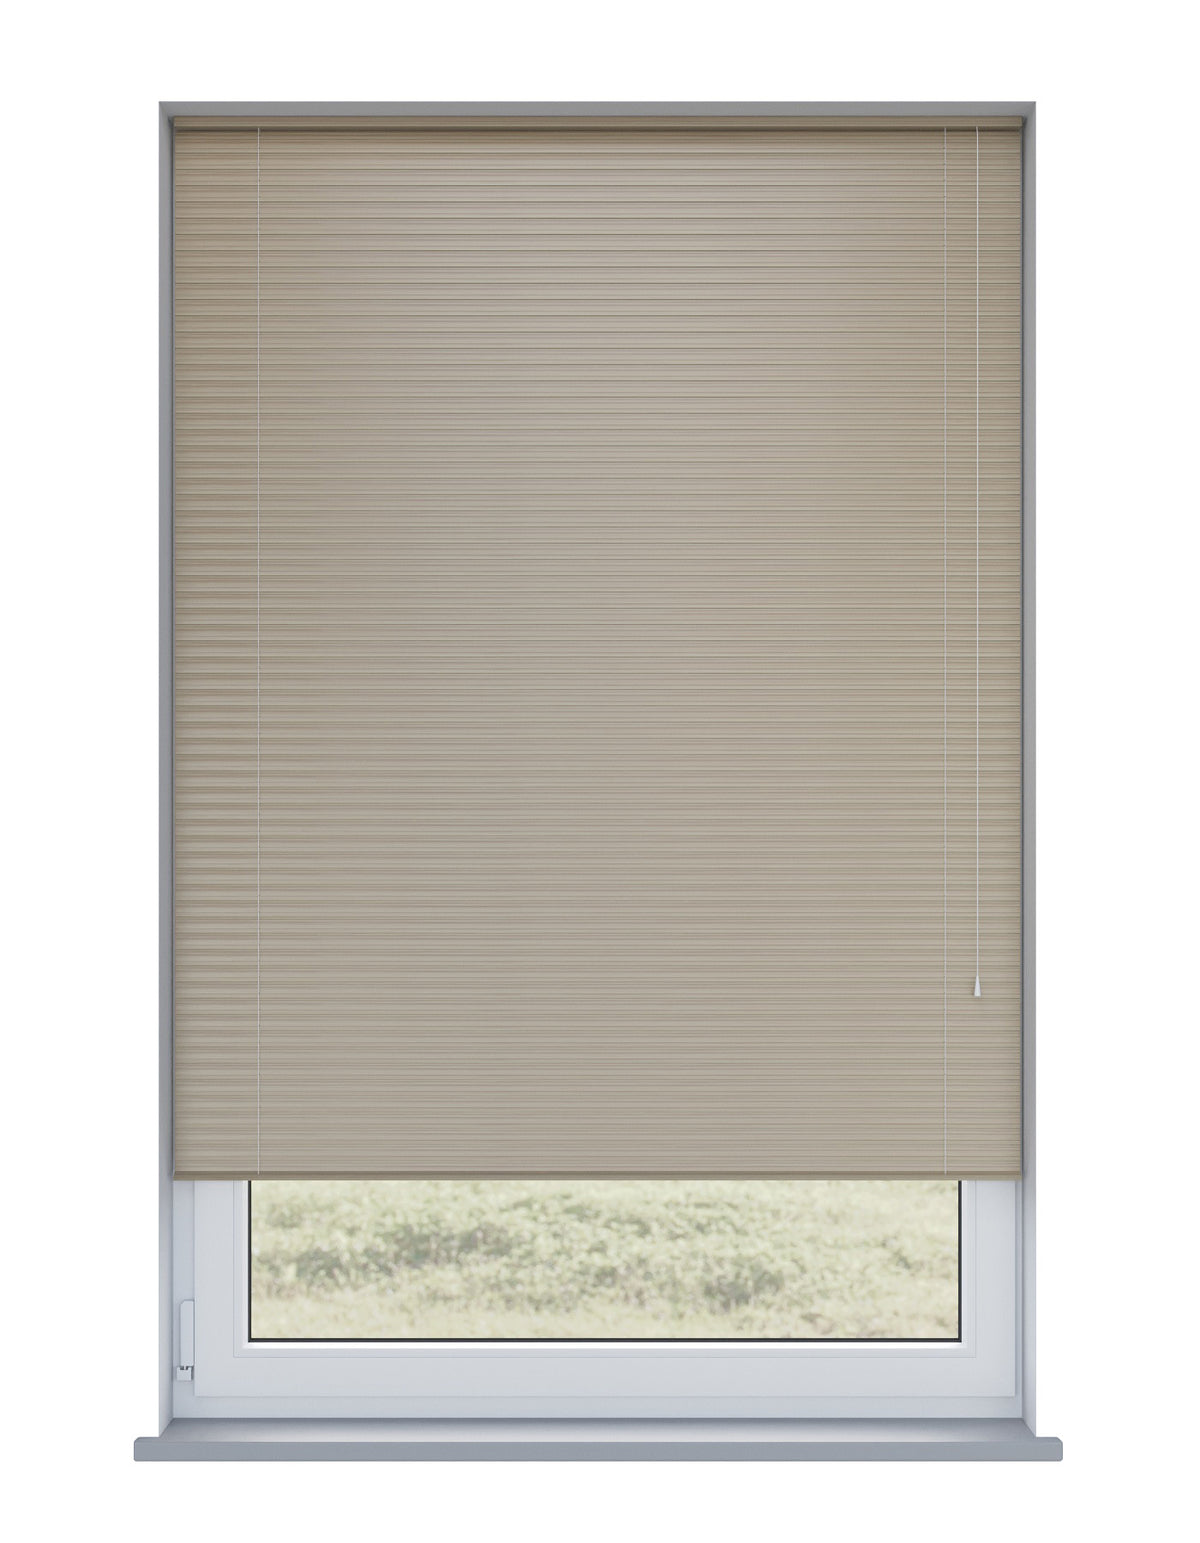 Expressions Clove Wooden Blind